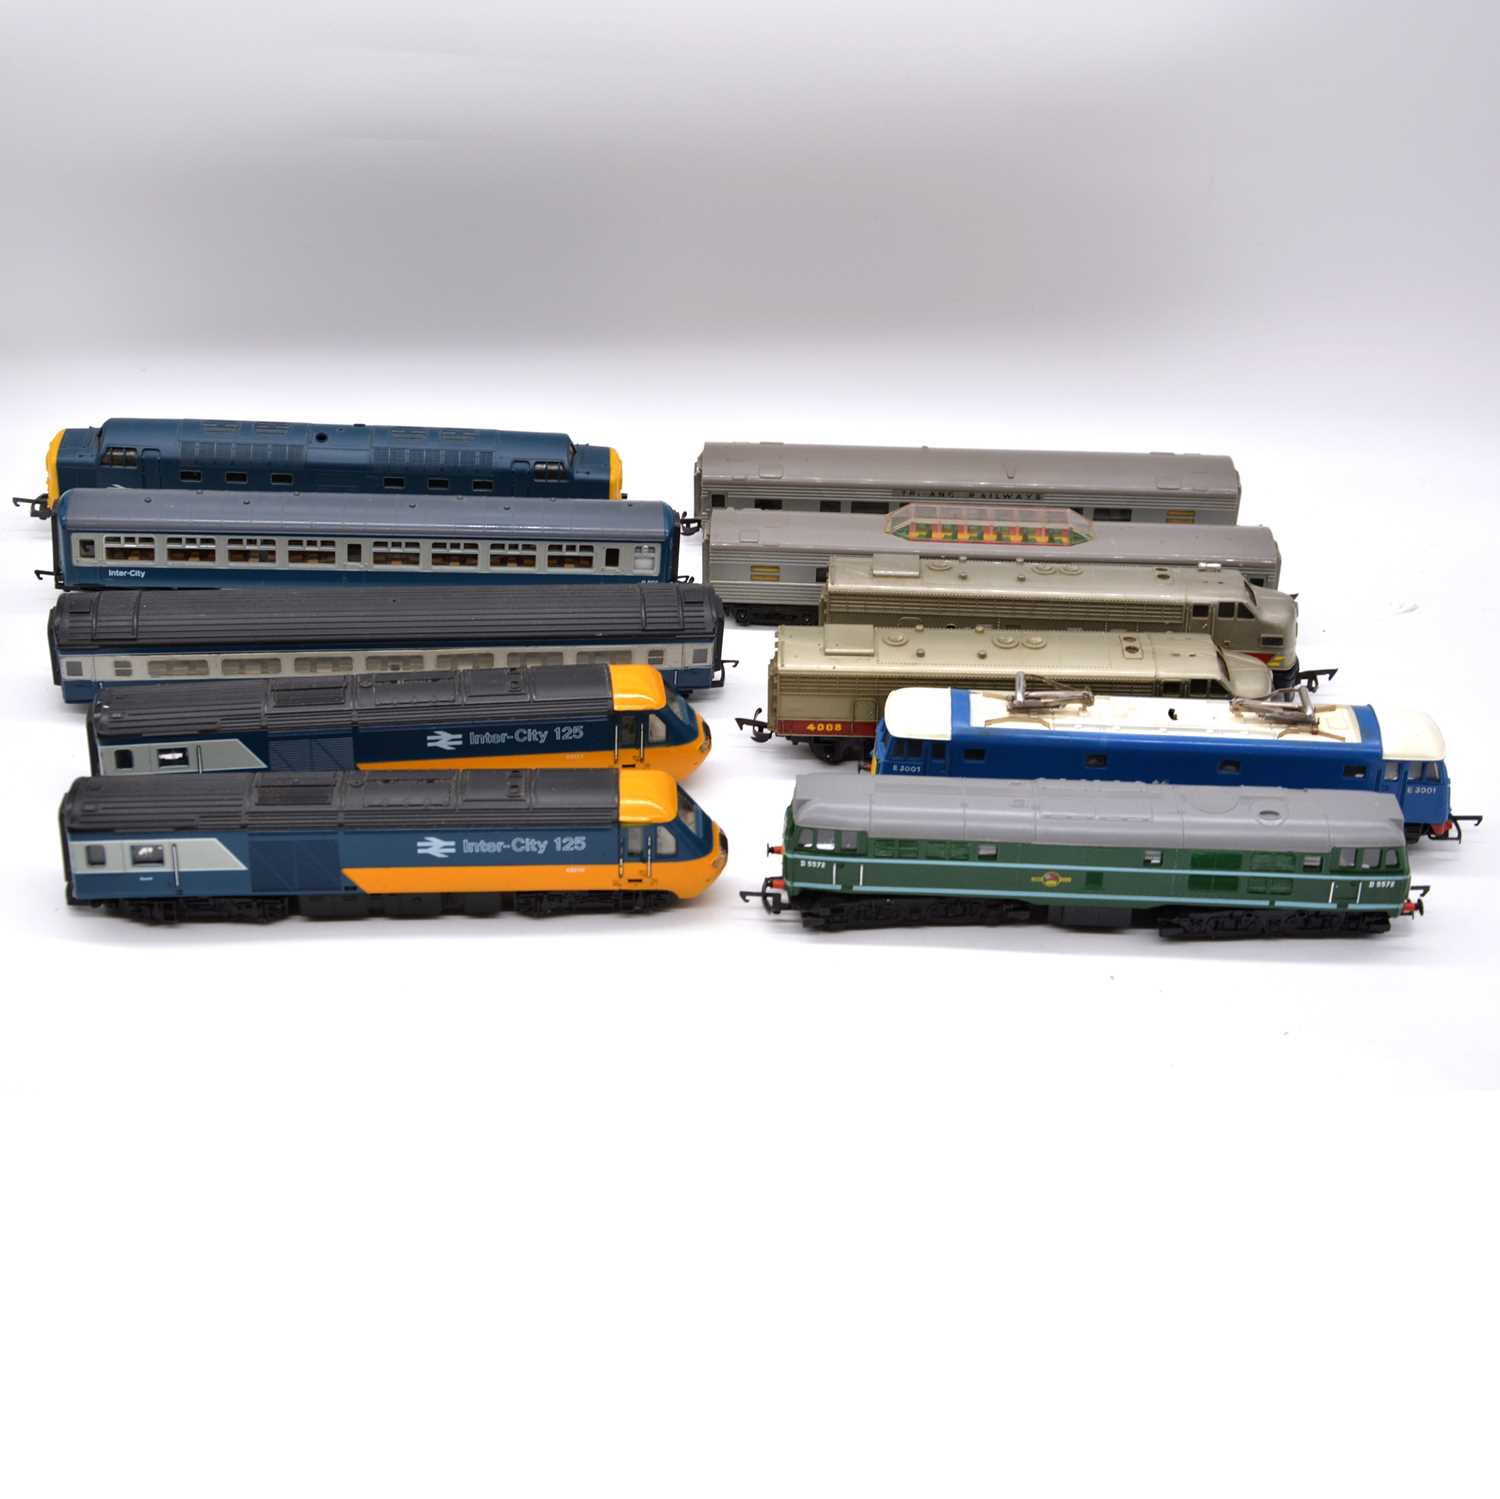 Lot 331 - Eleven Lima, Tri-ang and Hornby OO gauge model railway locomotives and passenger coaches, unboxed.